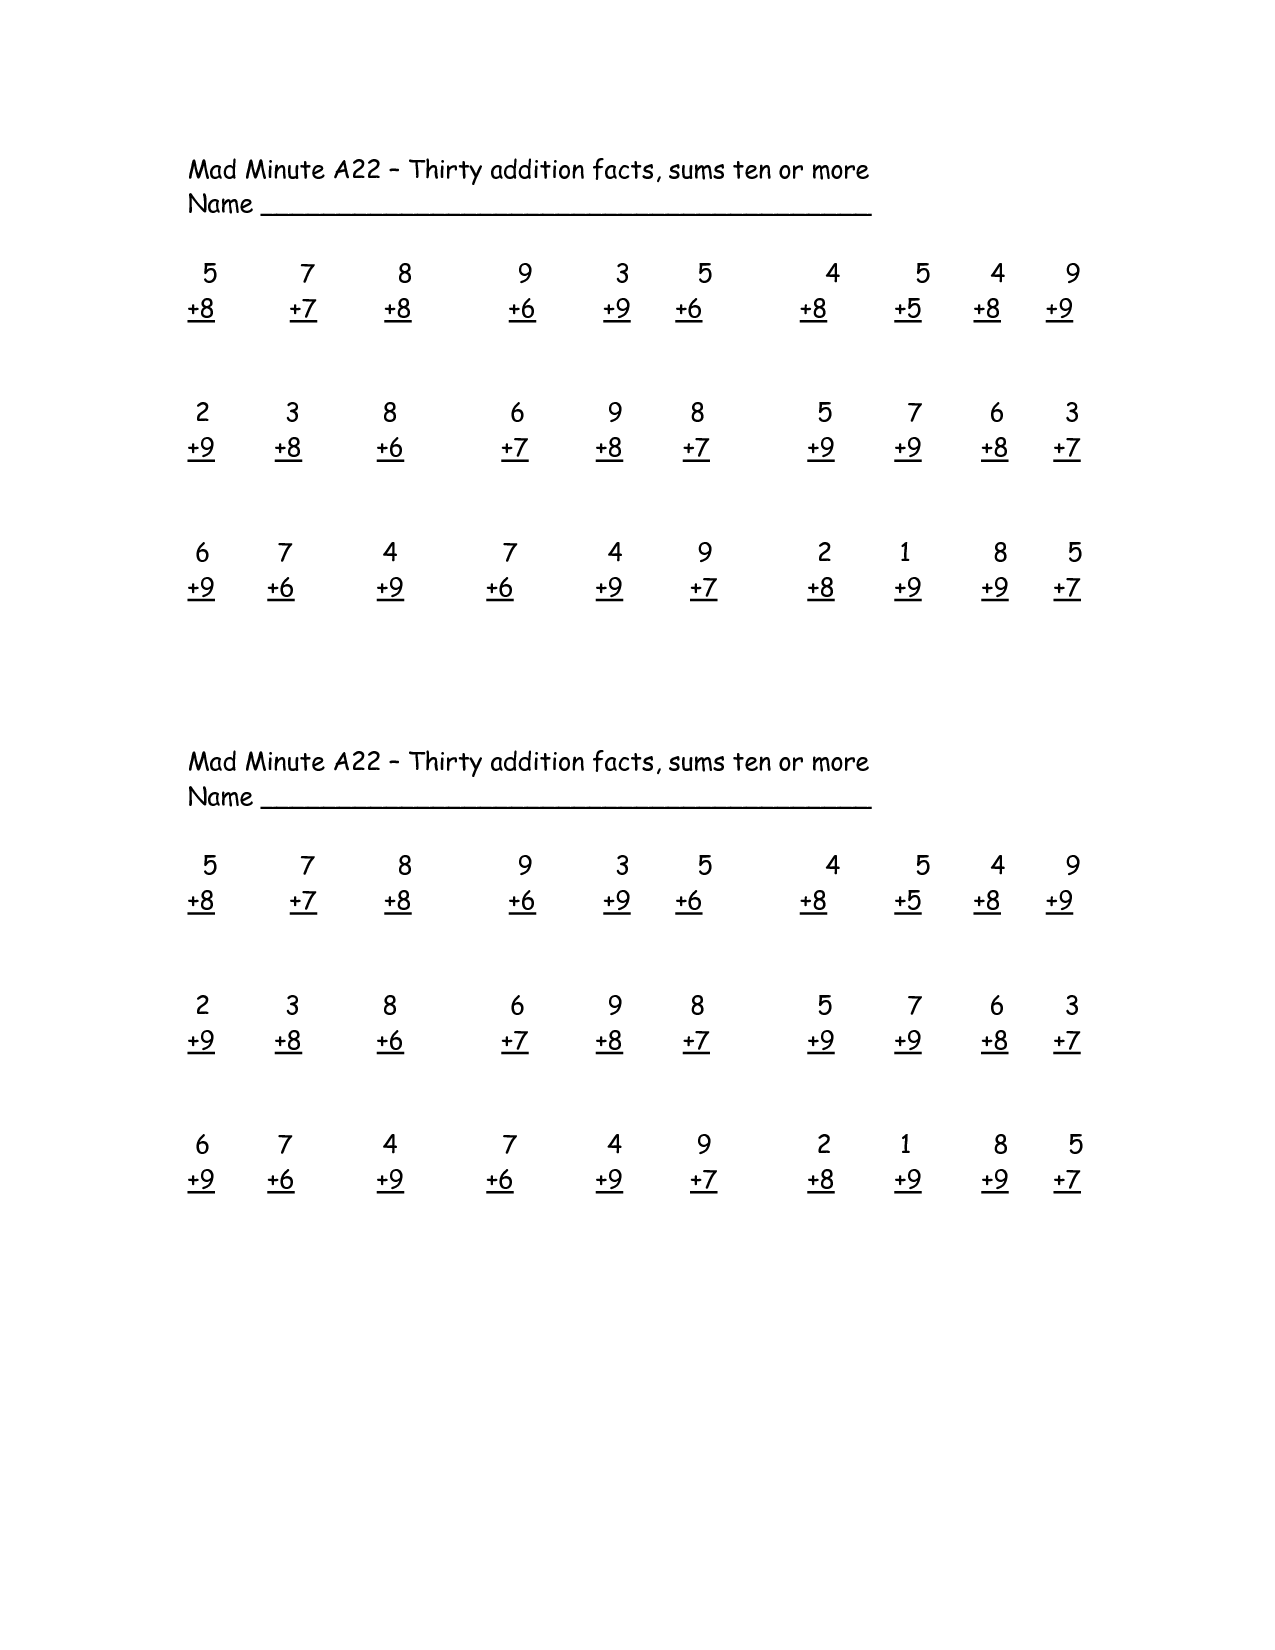 10 Best Images of Mad Minute Math Multiplication Worksheets - Mad